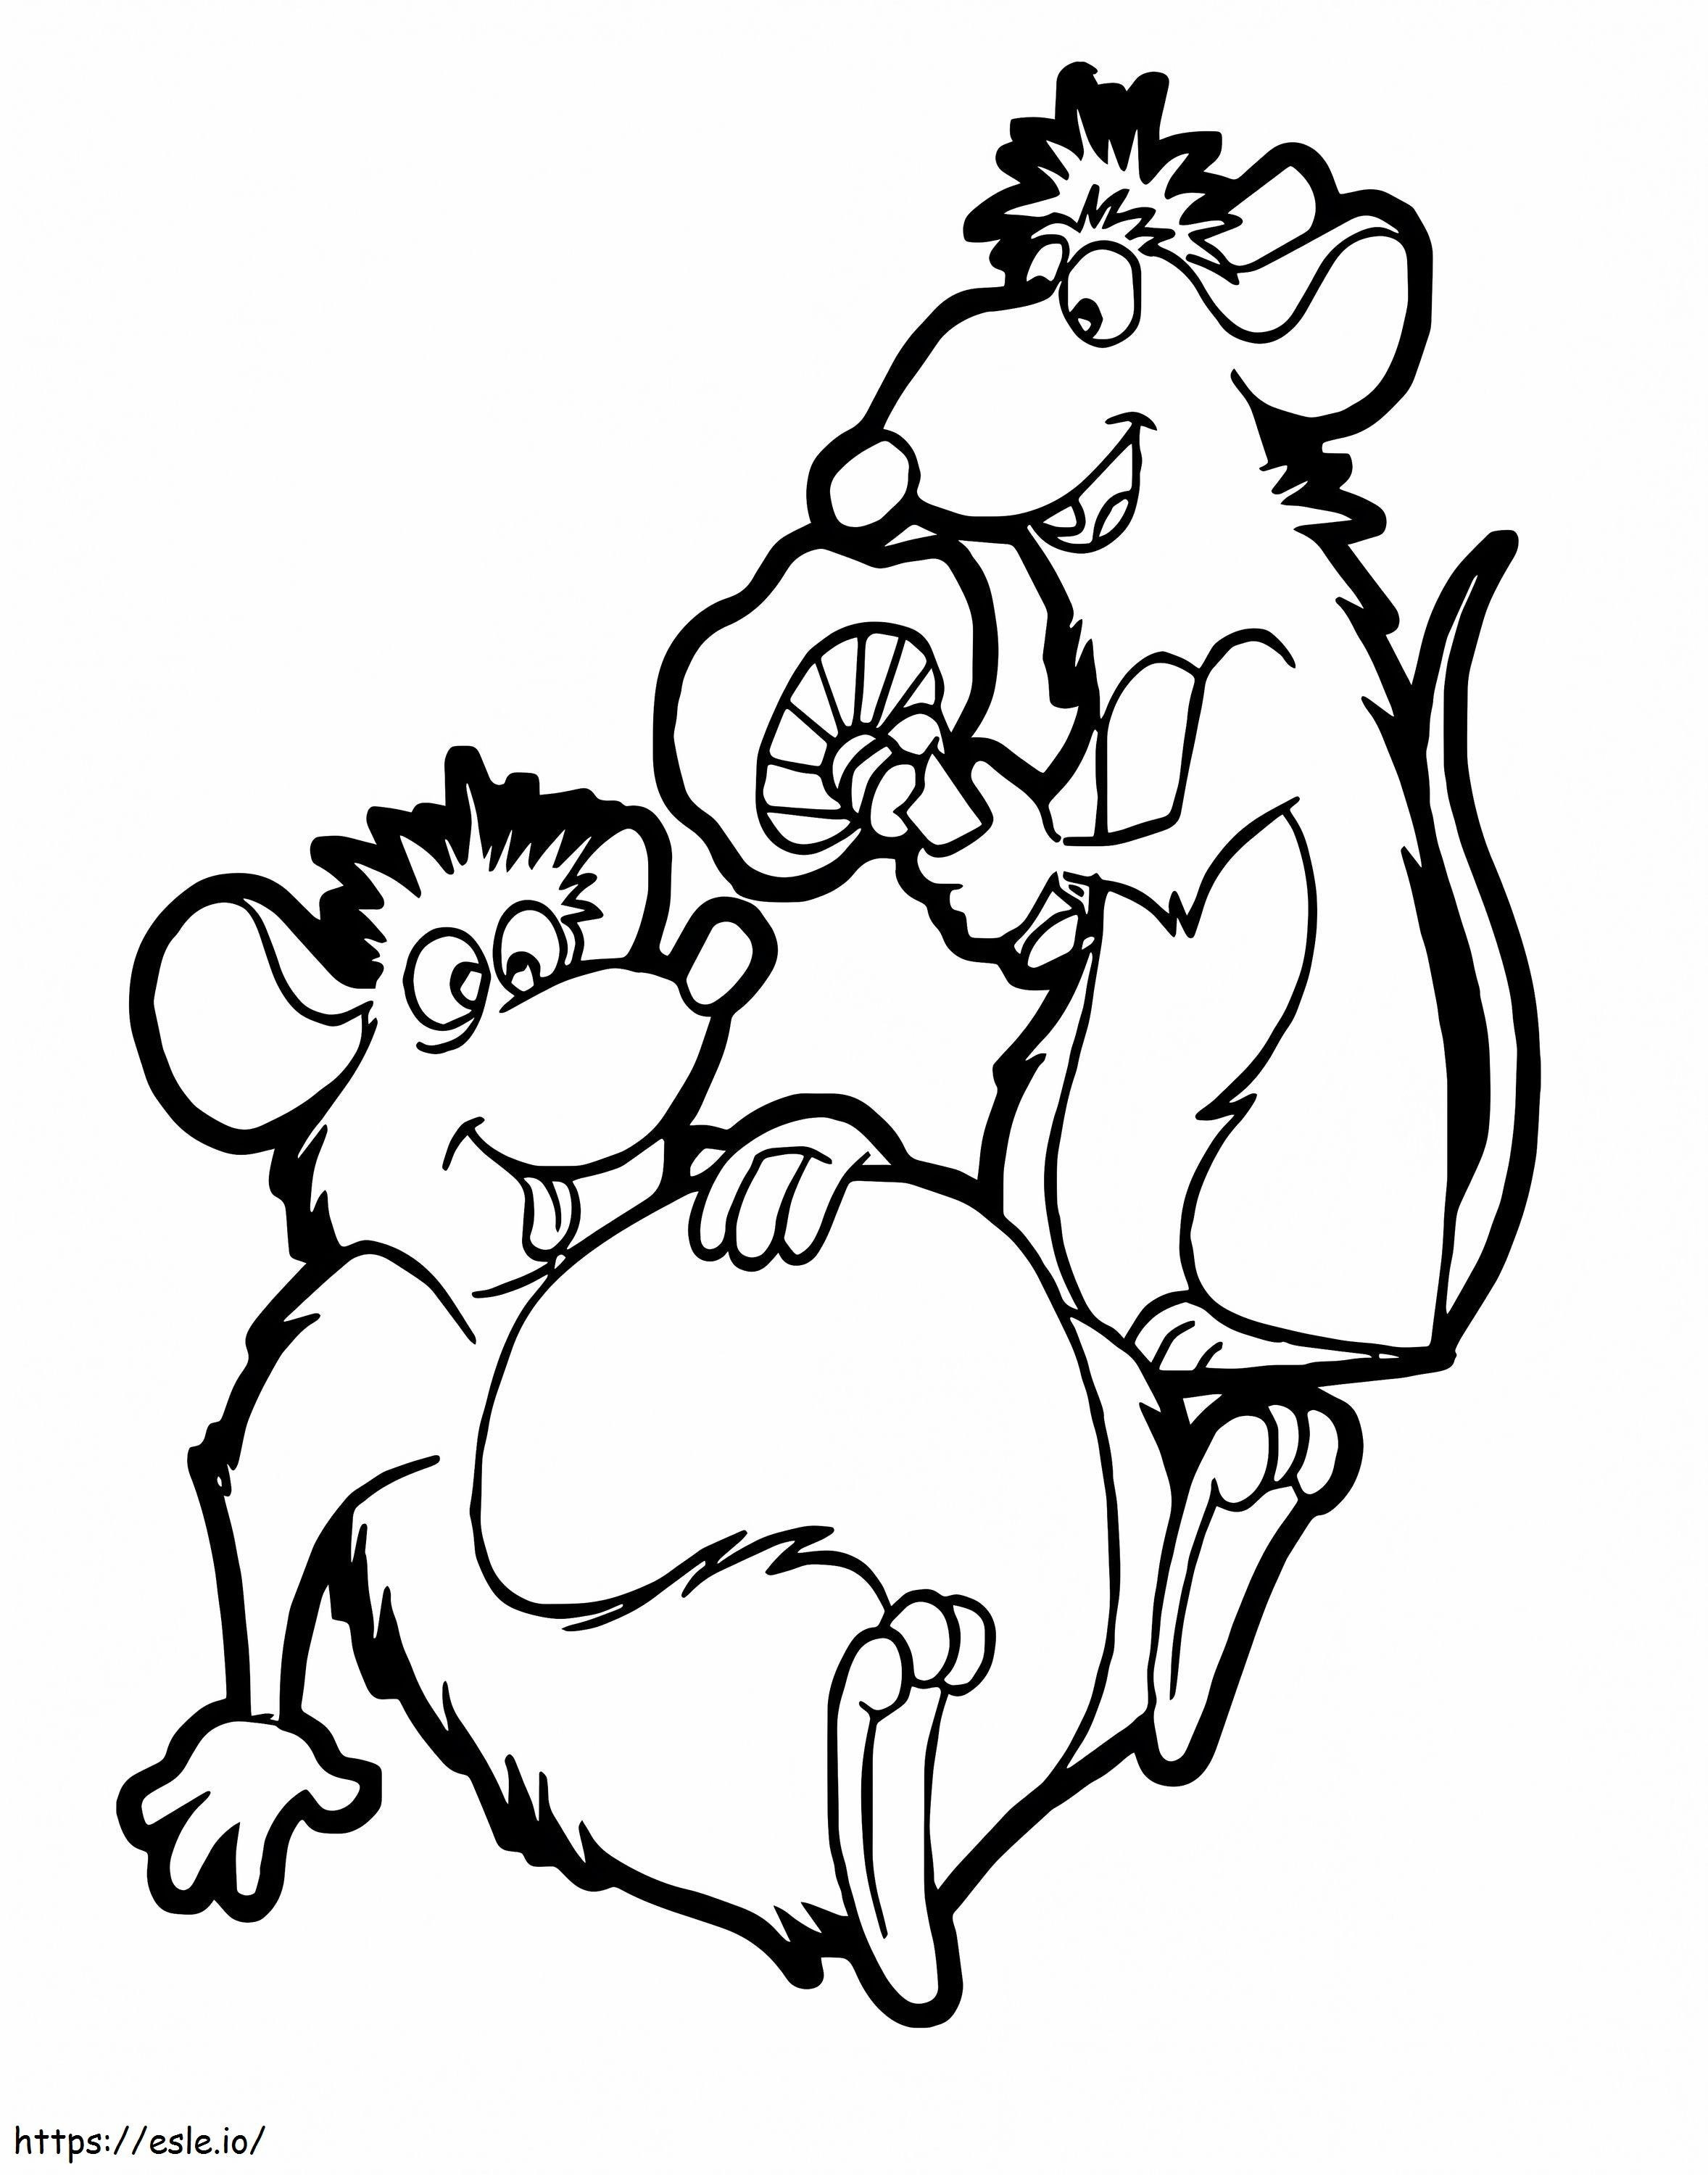 1555721540 Cheese Disney Ratatouille Fresh Ratatouille And Cheese Of Cheese coloring page